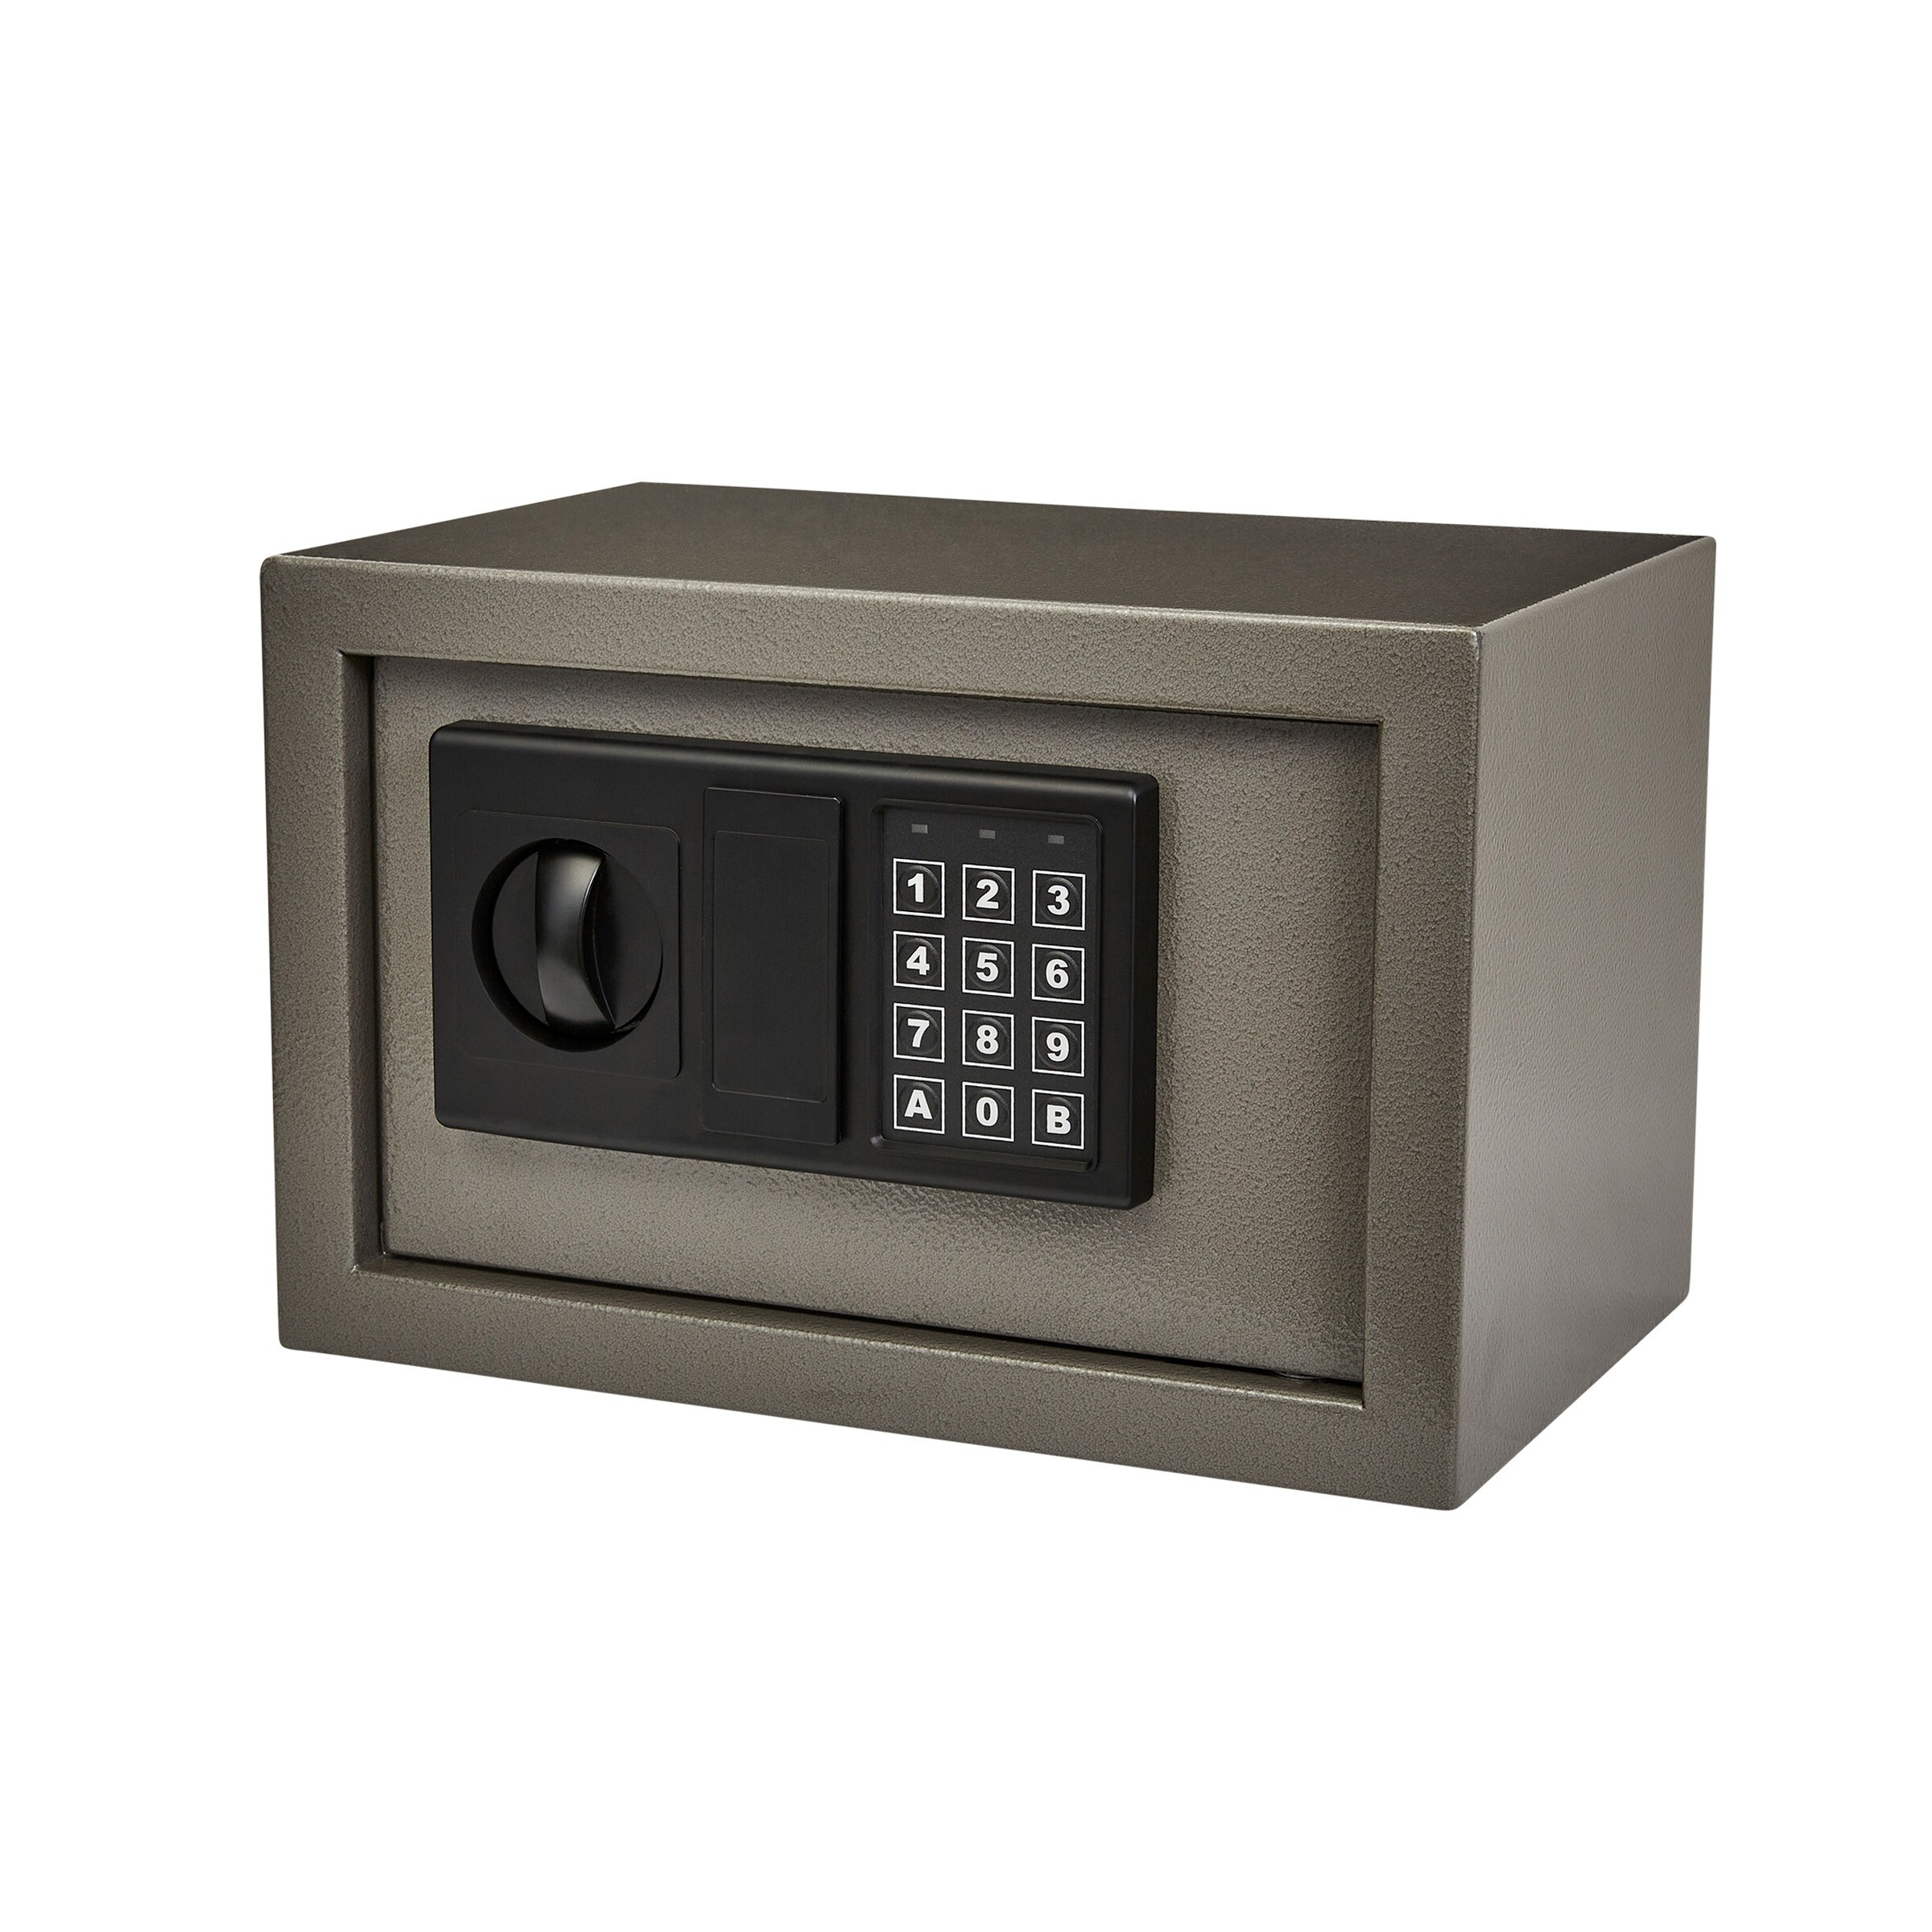 https://ak1.ostkcdn.com/images/products/is/images/direct/a33d183d27220263a7d280eb51e67a25c345f3fe/Digital-Safe-Box---Steel-Lock-Box-with-Keypad%2C-2-Manual-Override-Keys-by-Stalwart.jpg